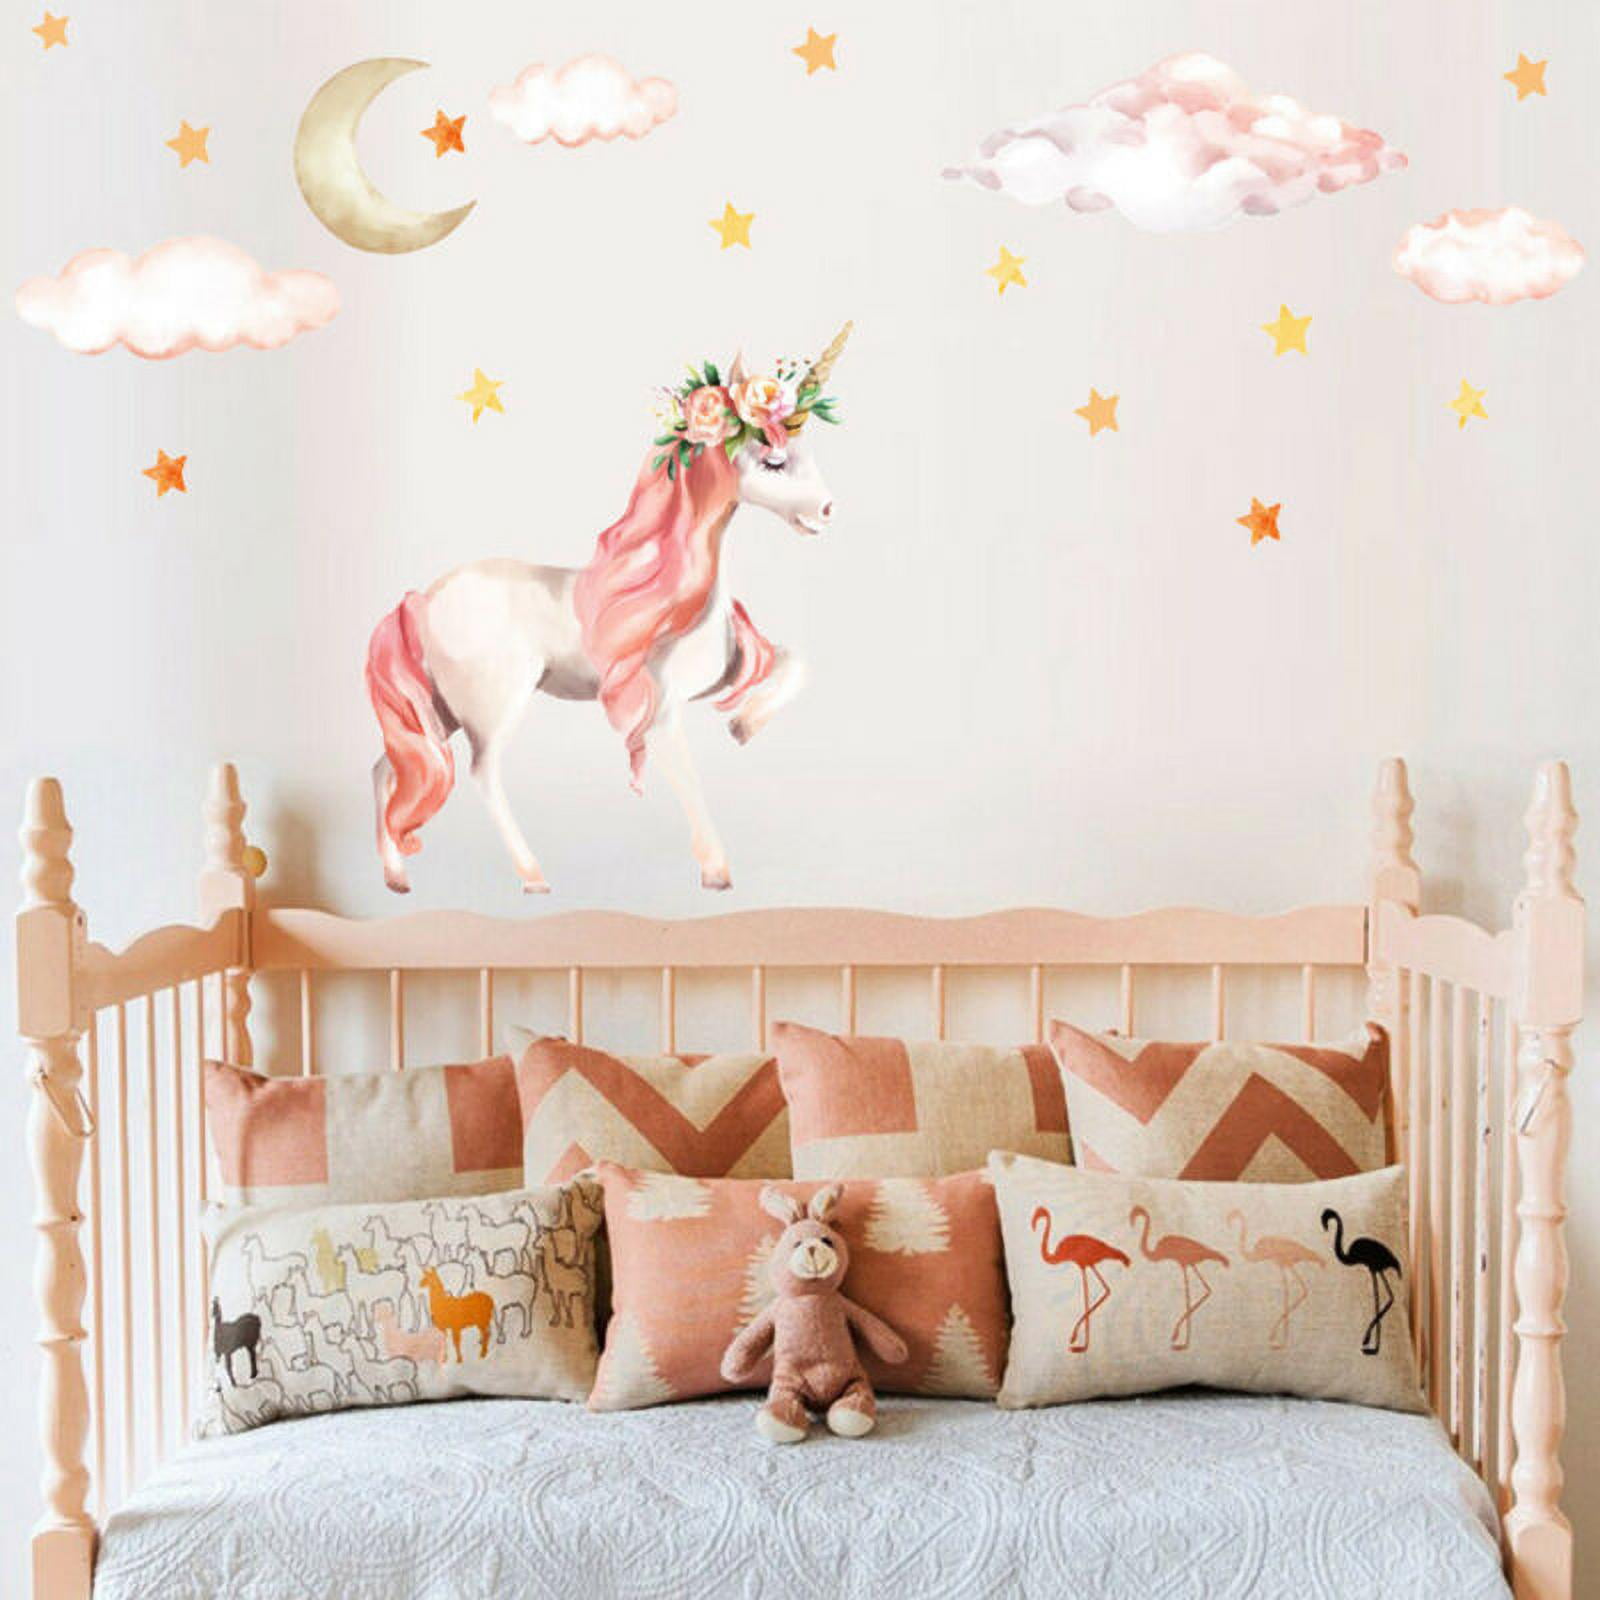 Vinyl Art Decoration For Teens Bedroom or Playroom Decor Dance With Fairies Ride A Unicorn Swim With Mermaids Girls Room Wall Decal